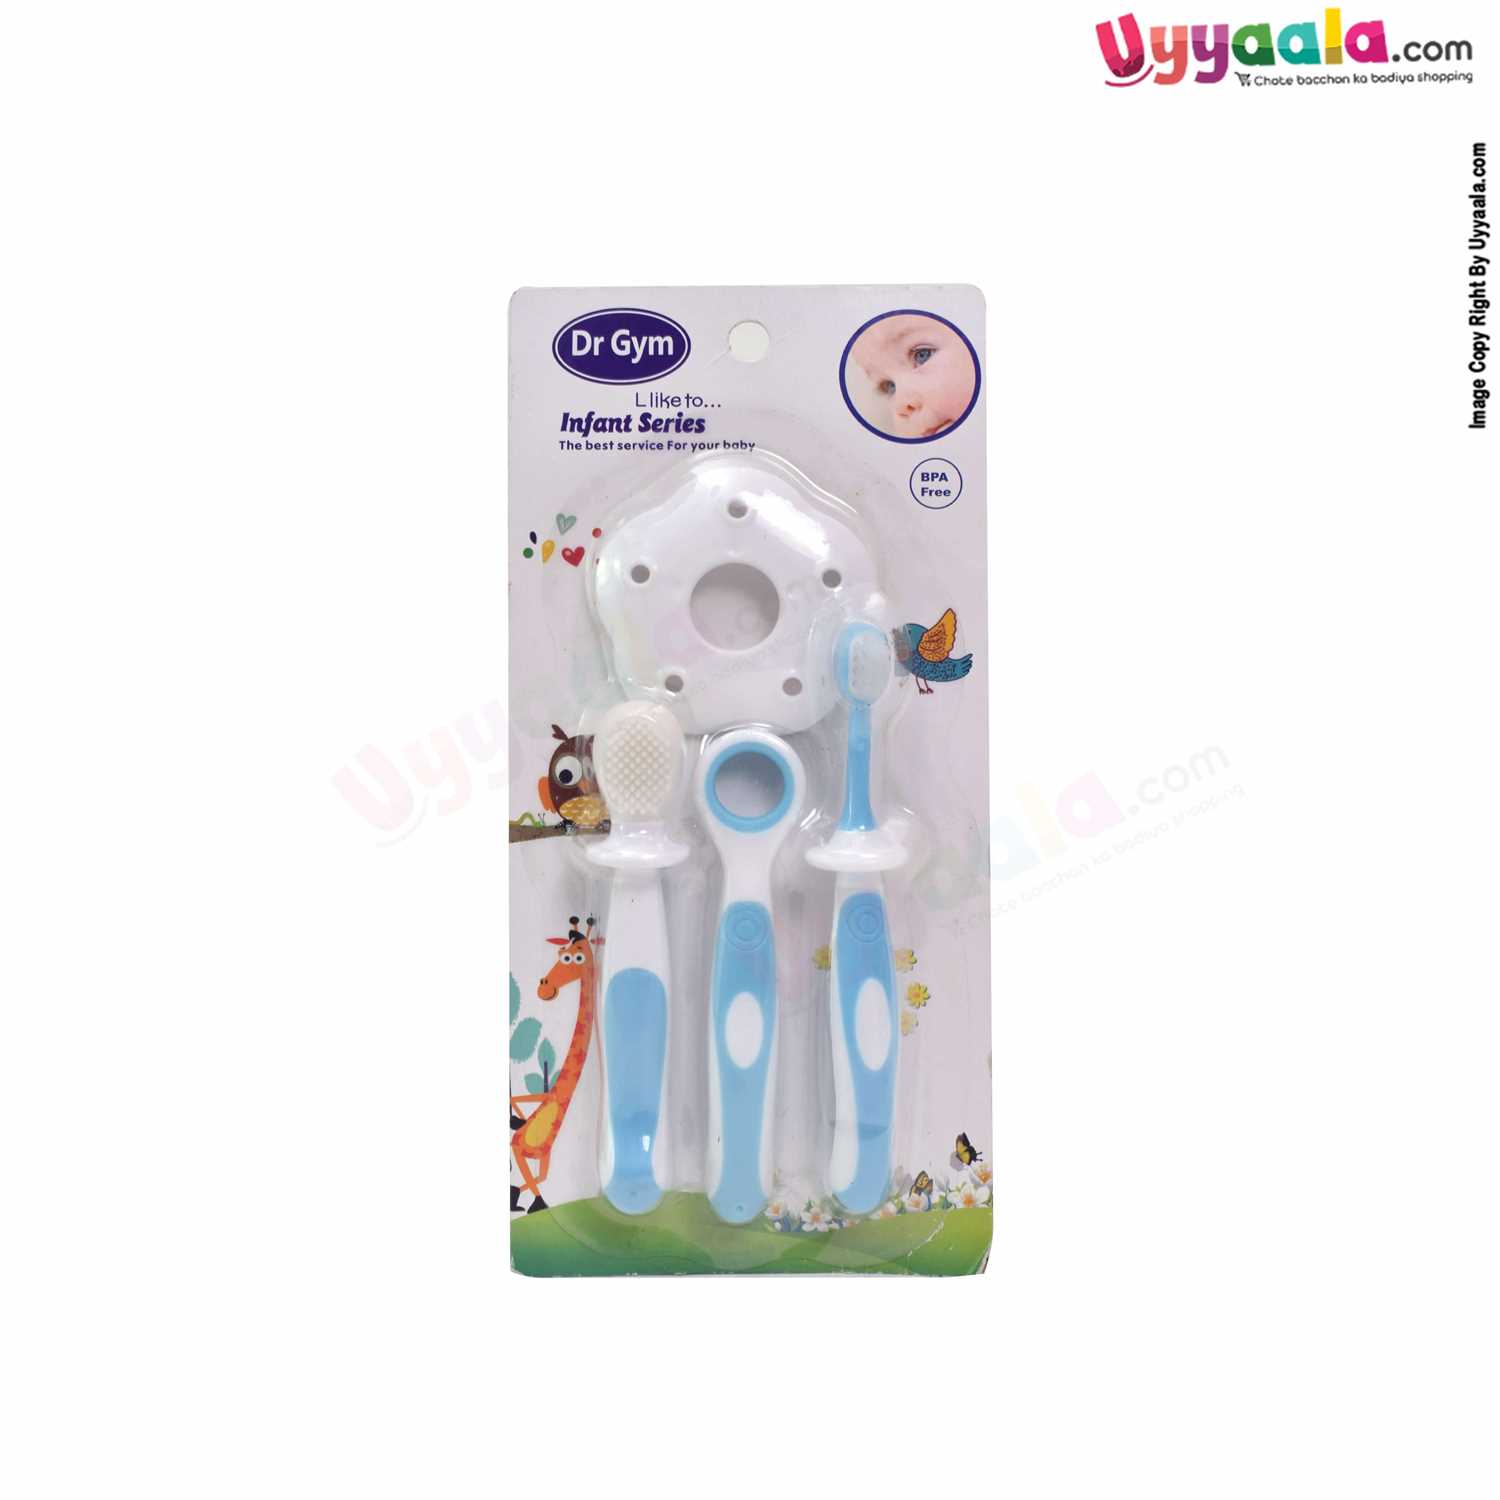 Buy Dr Gym Toothbrush Set with Anti-choking Shield for Small Babies Online in India at uyyaala.com